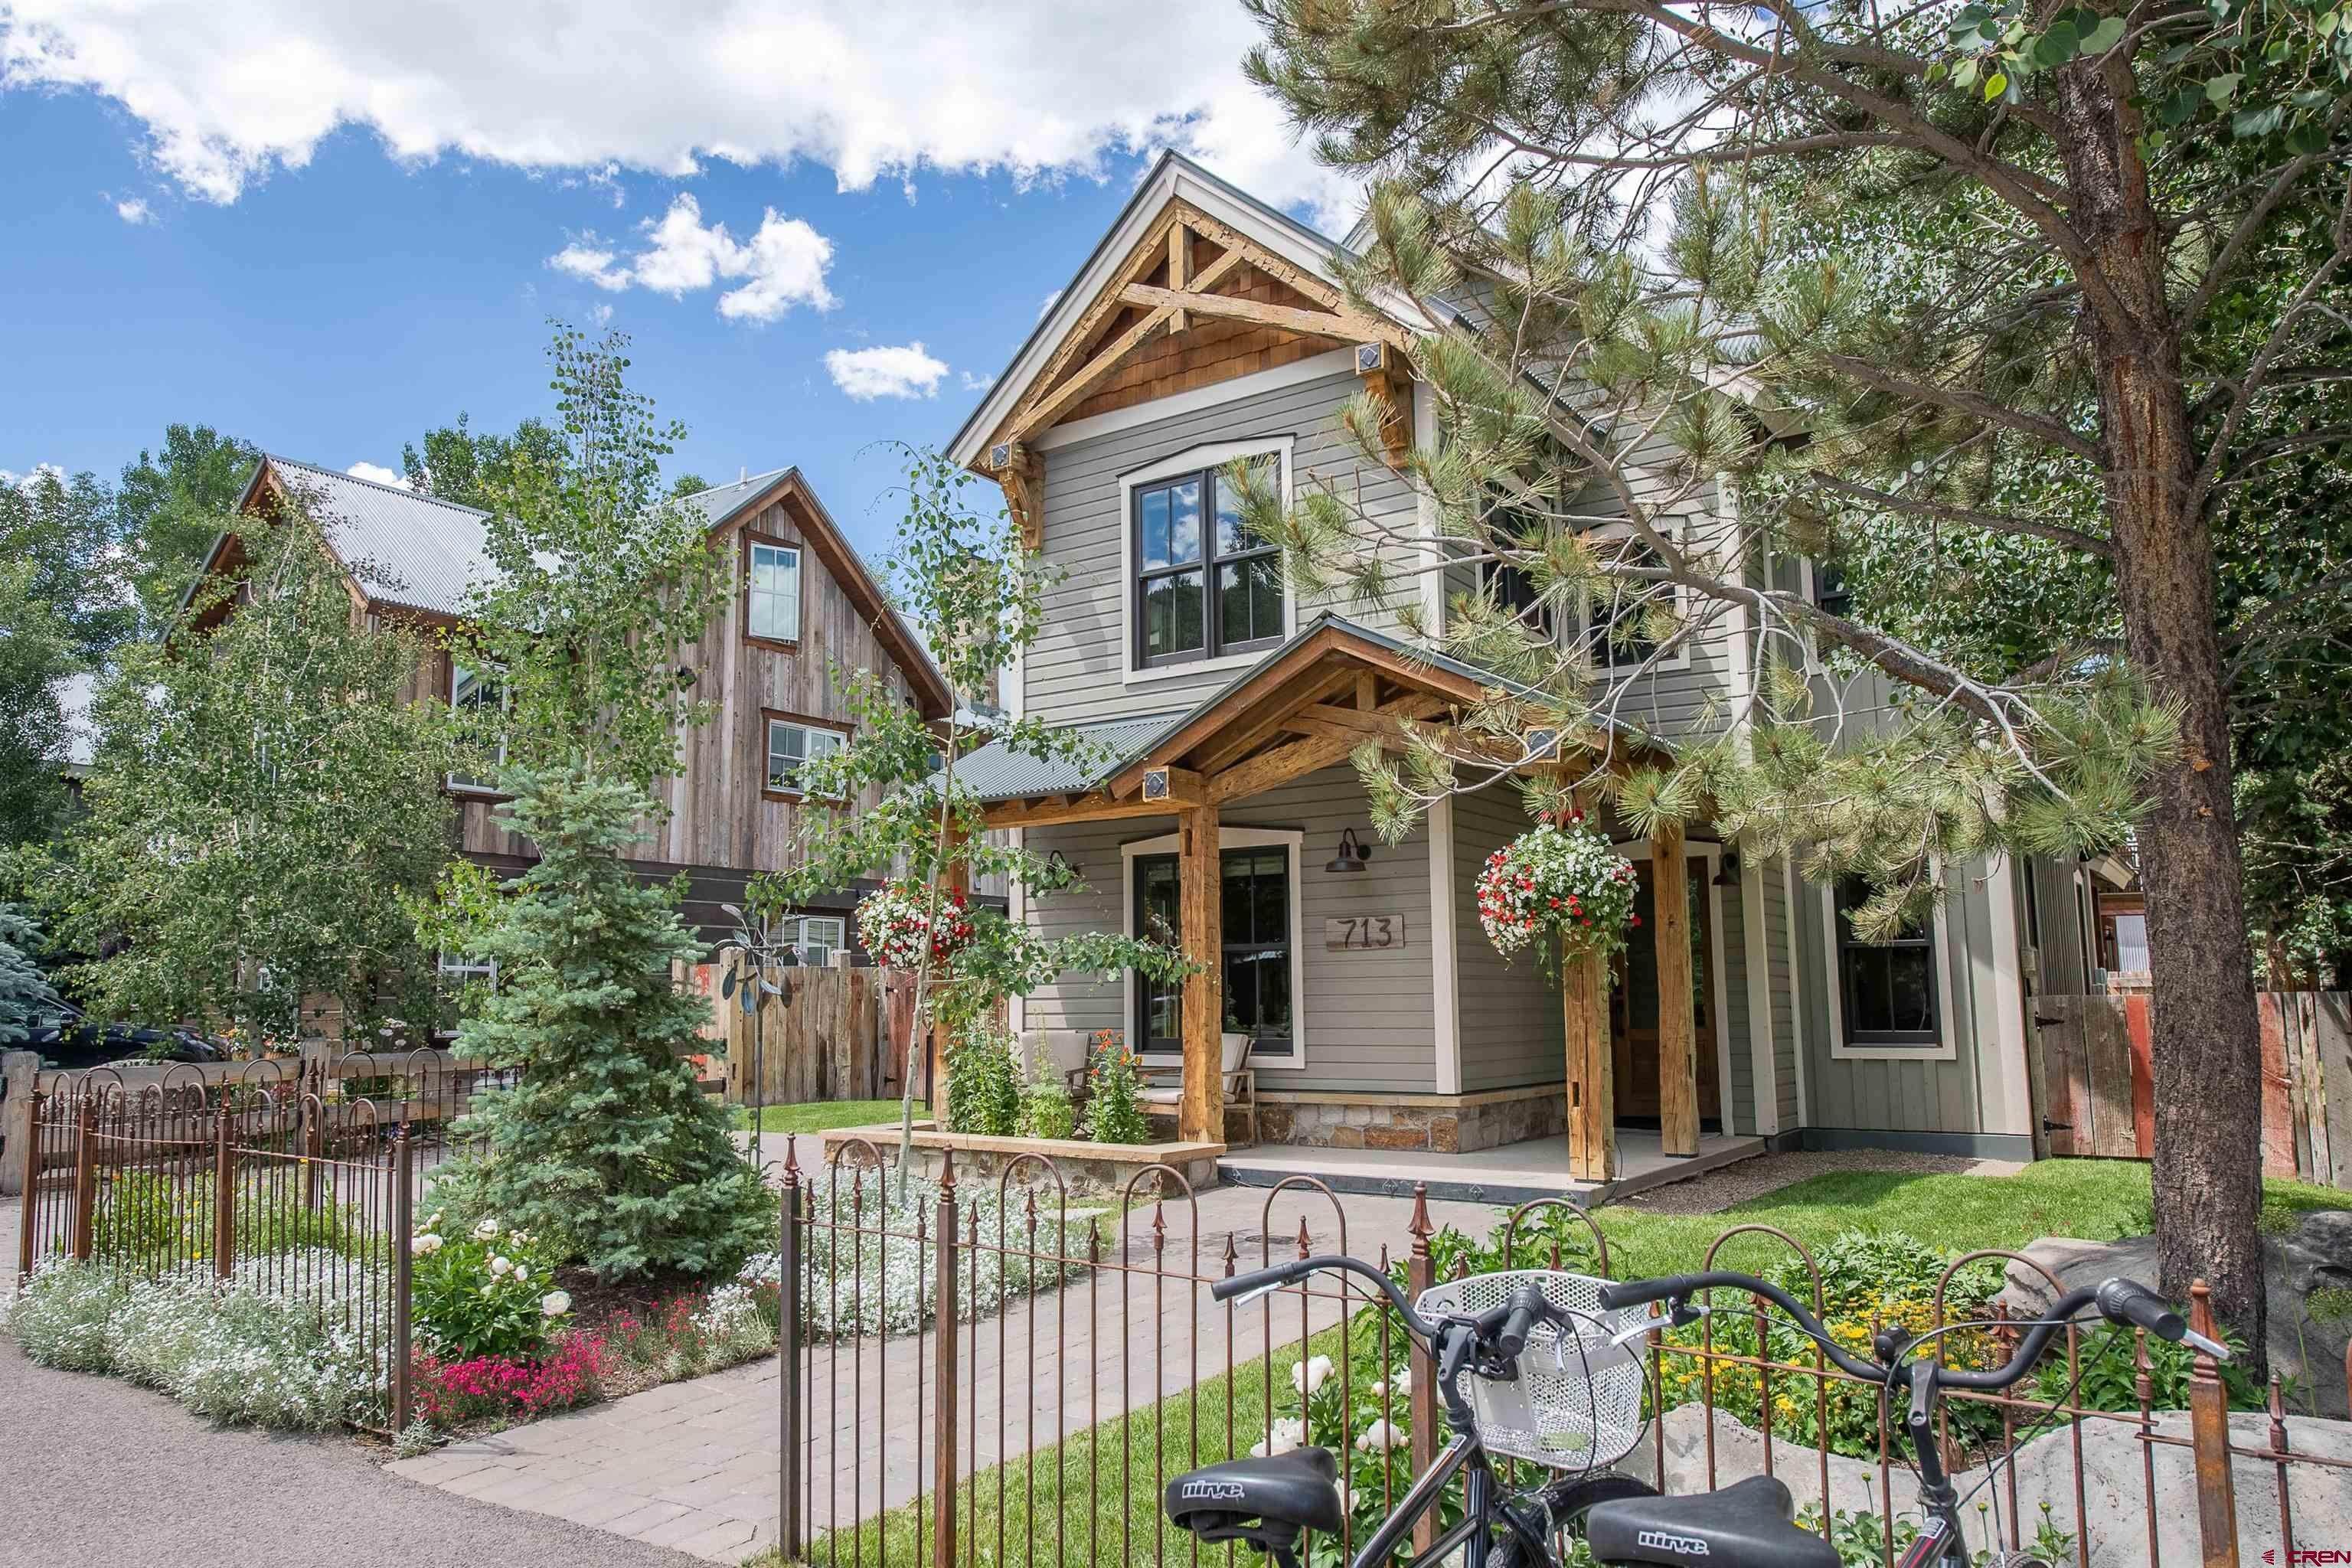 Single Family Homes for Sale at 713/715 Belleview Avenue Crested Butte, Colorado 81224 United States